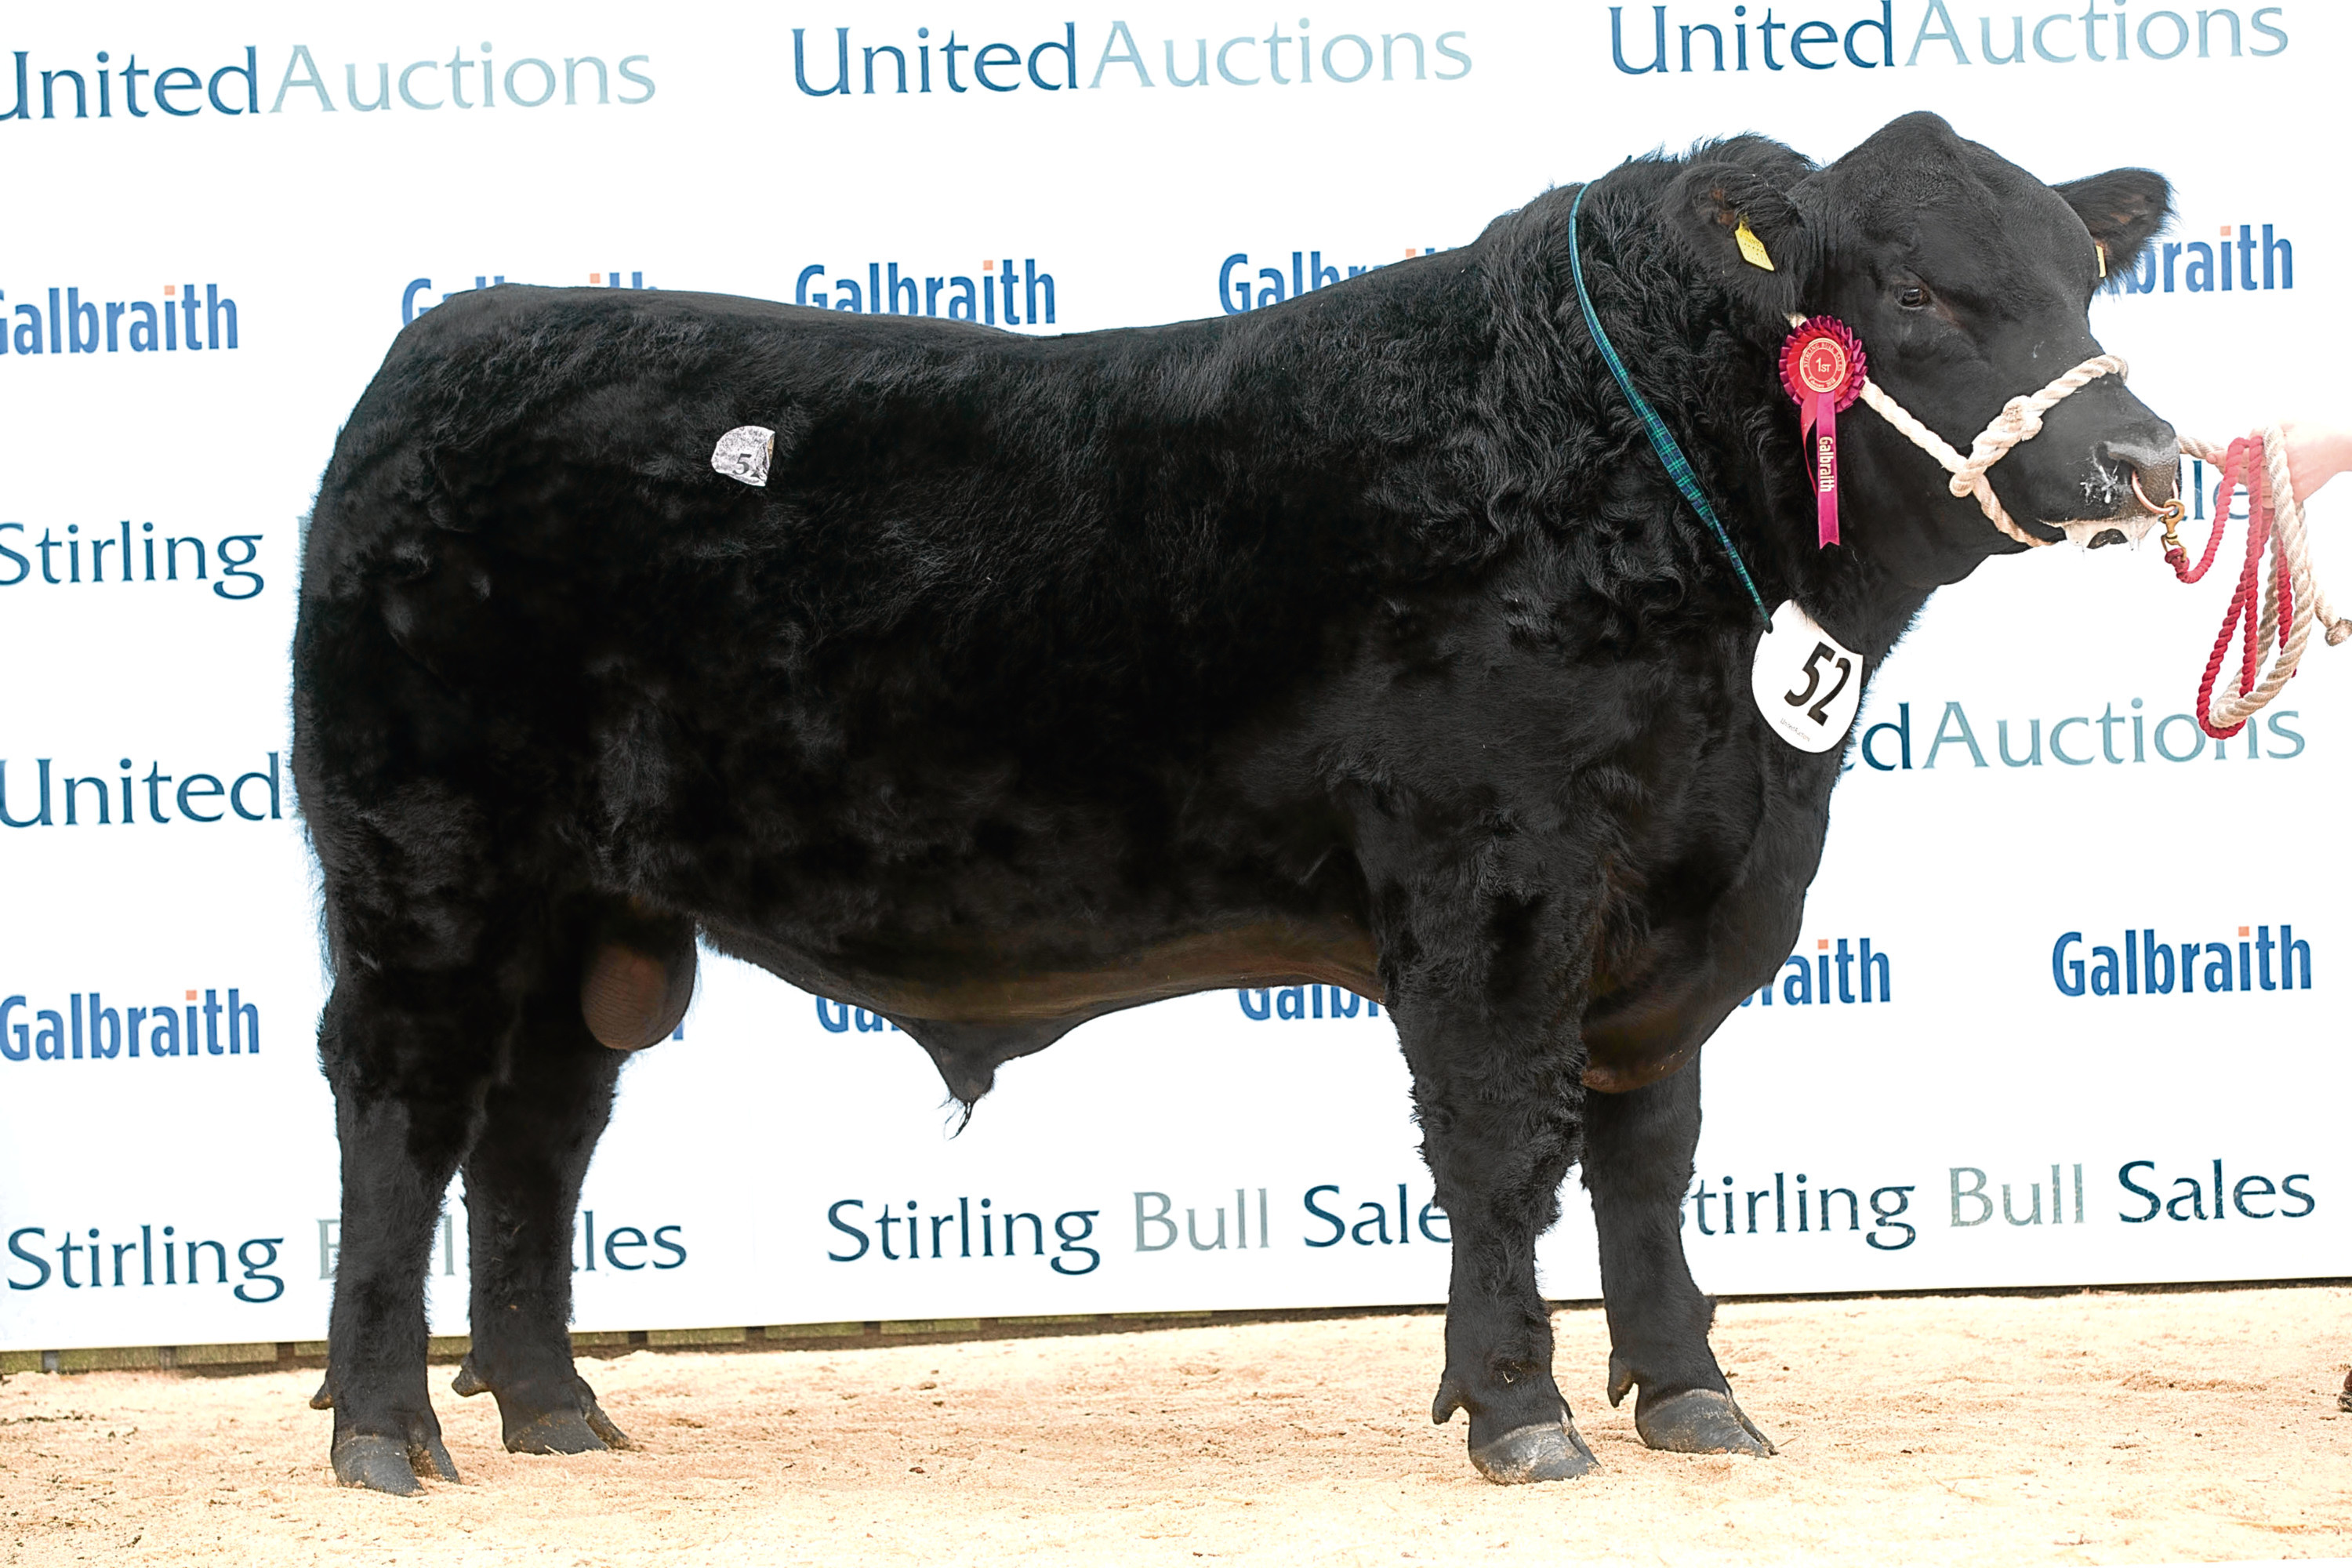 Thrunton Panther sold for 15,000gn